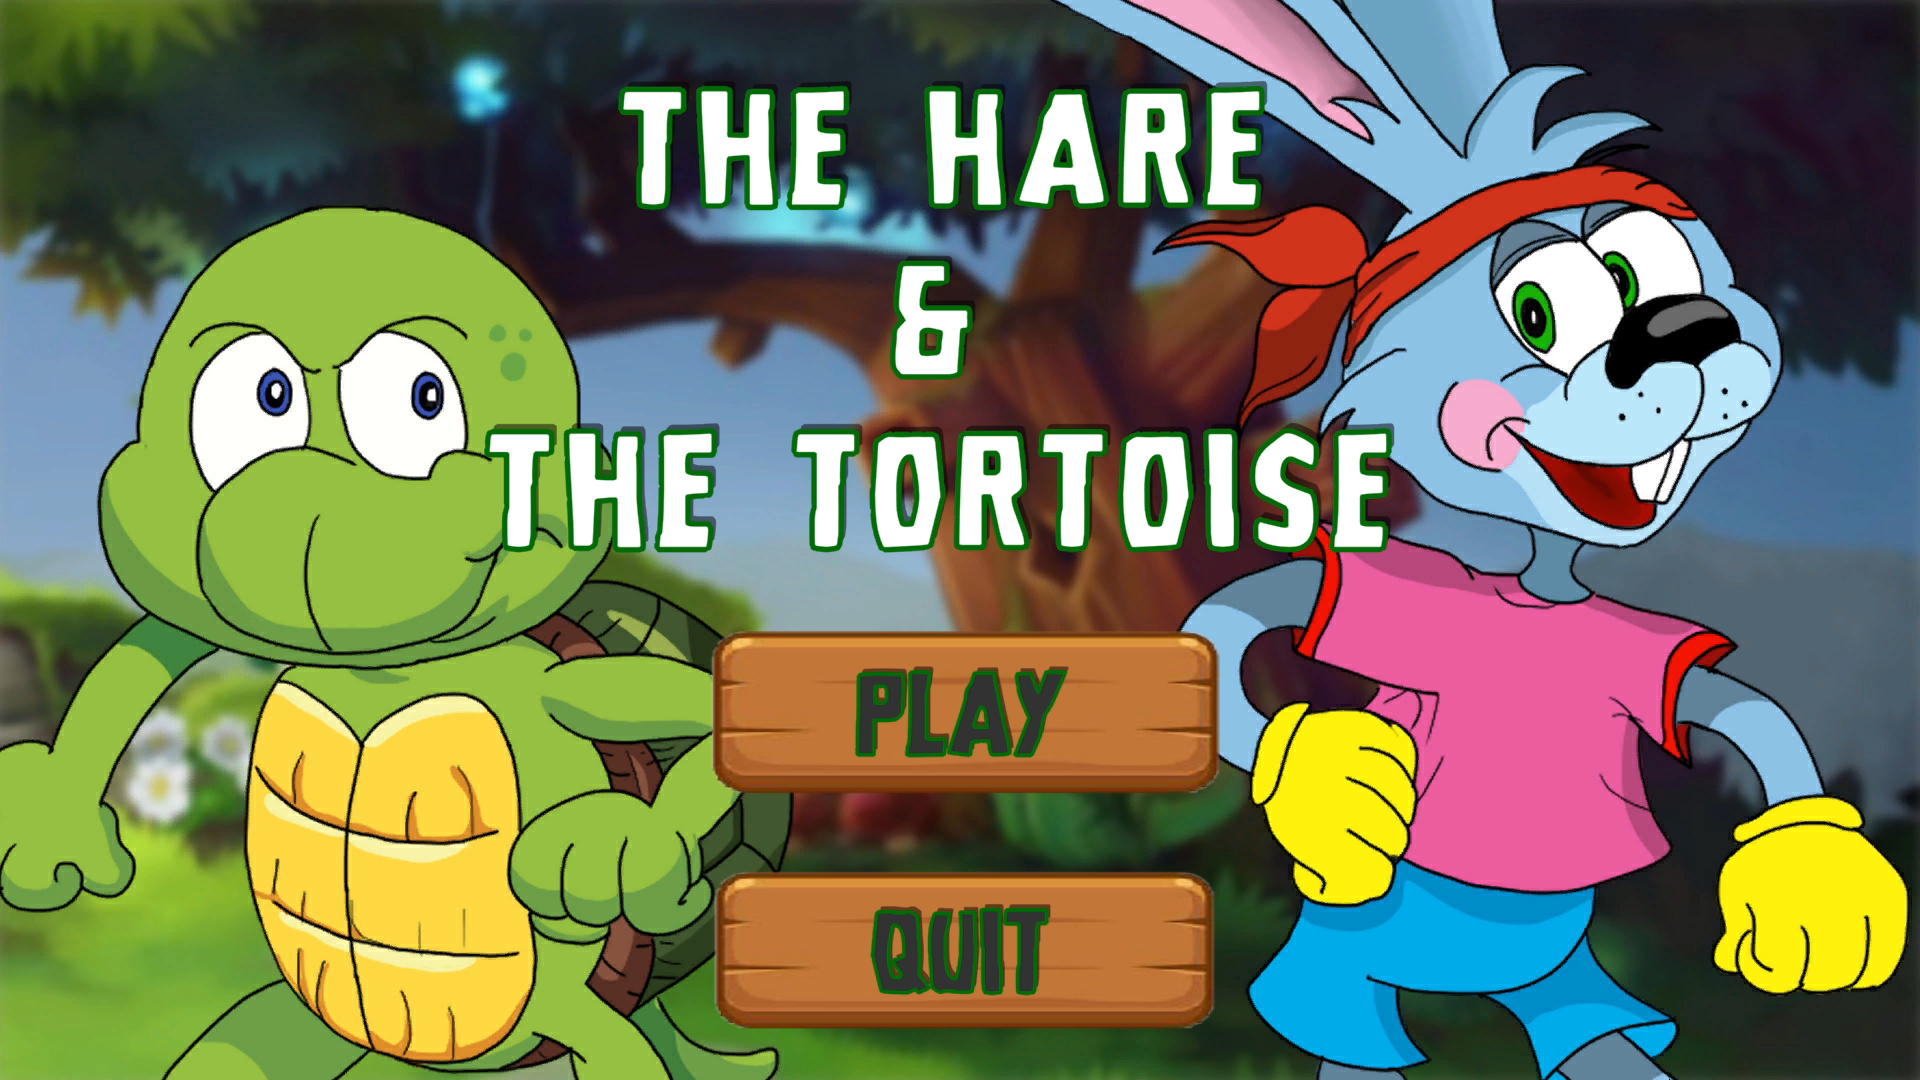 The Hare and The Tortoise